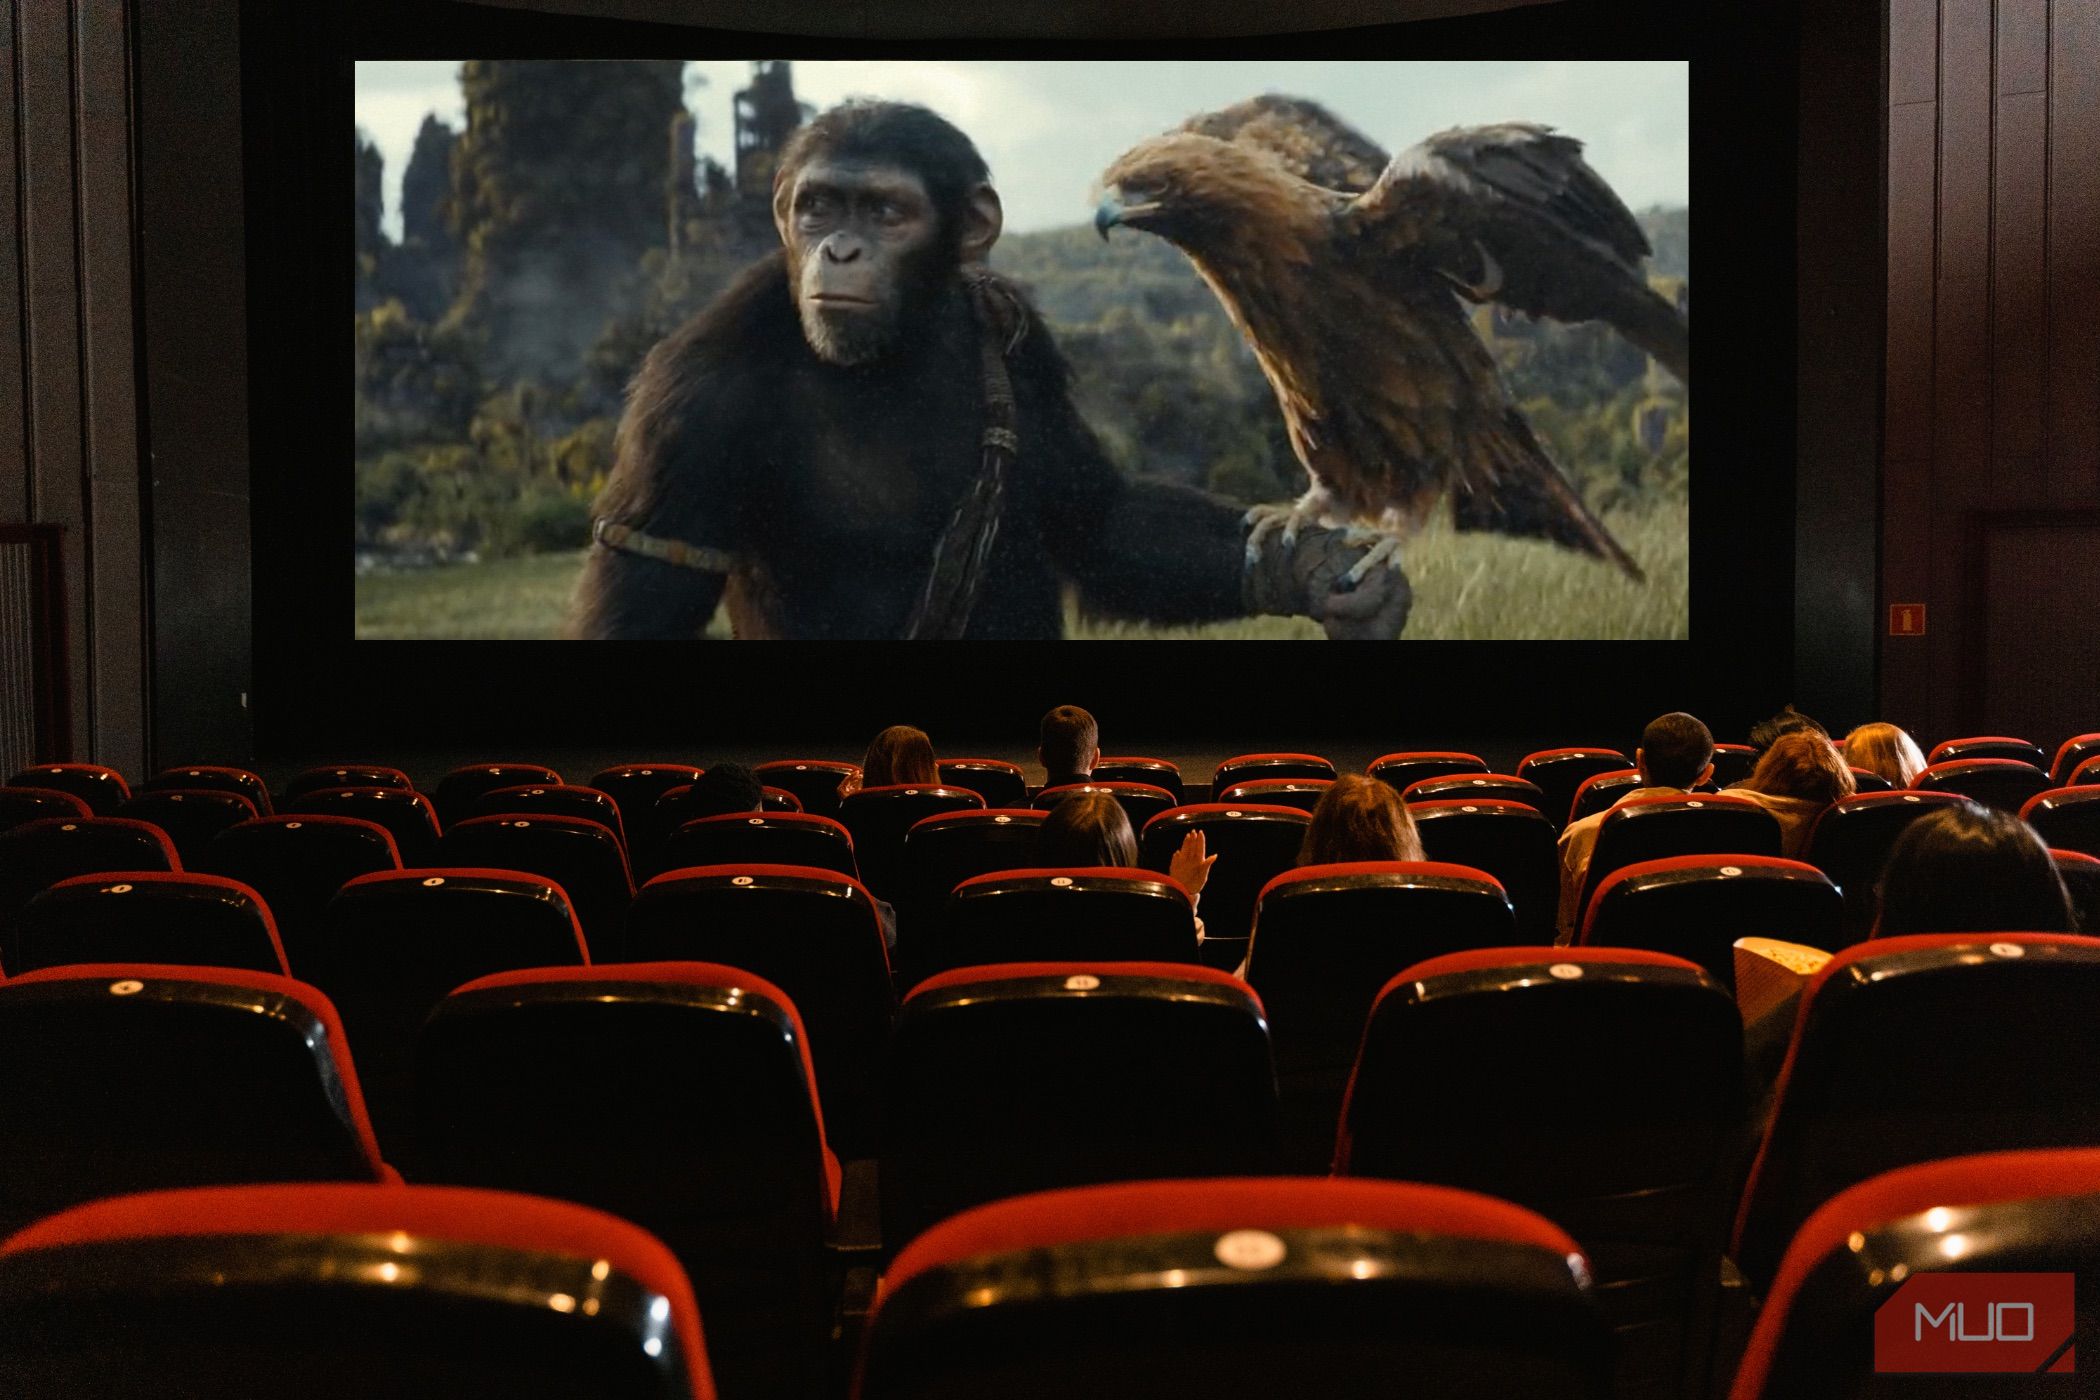 Kingdom of the Planet of the Apes on a movie screen.